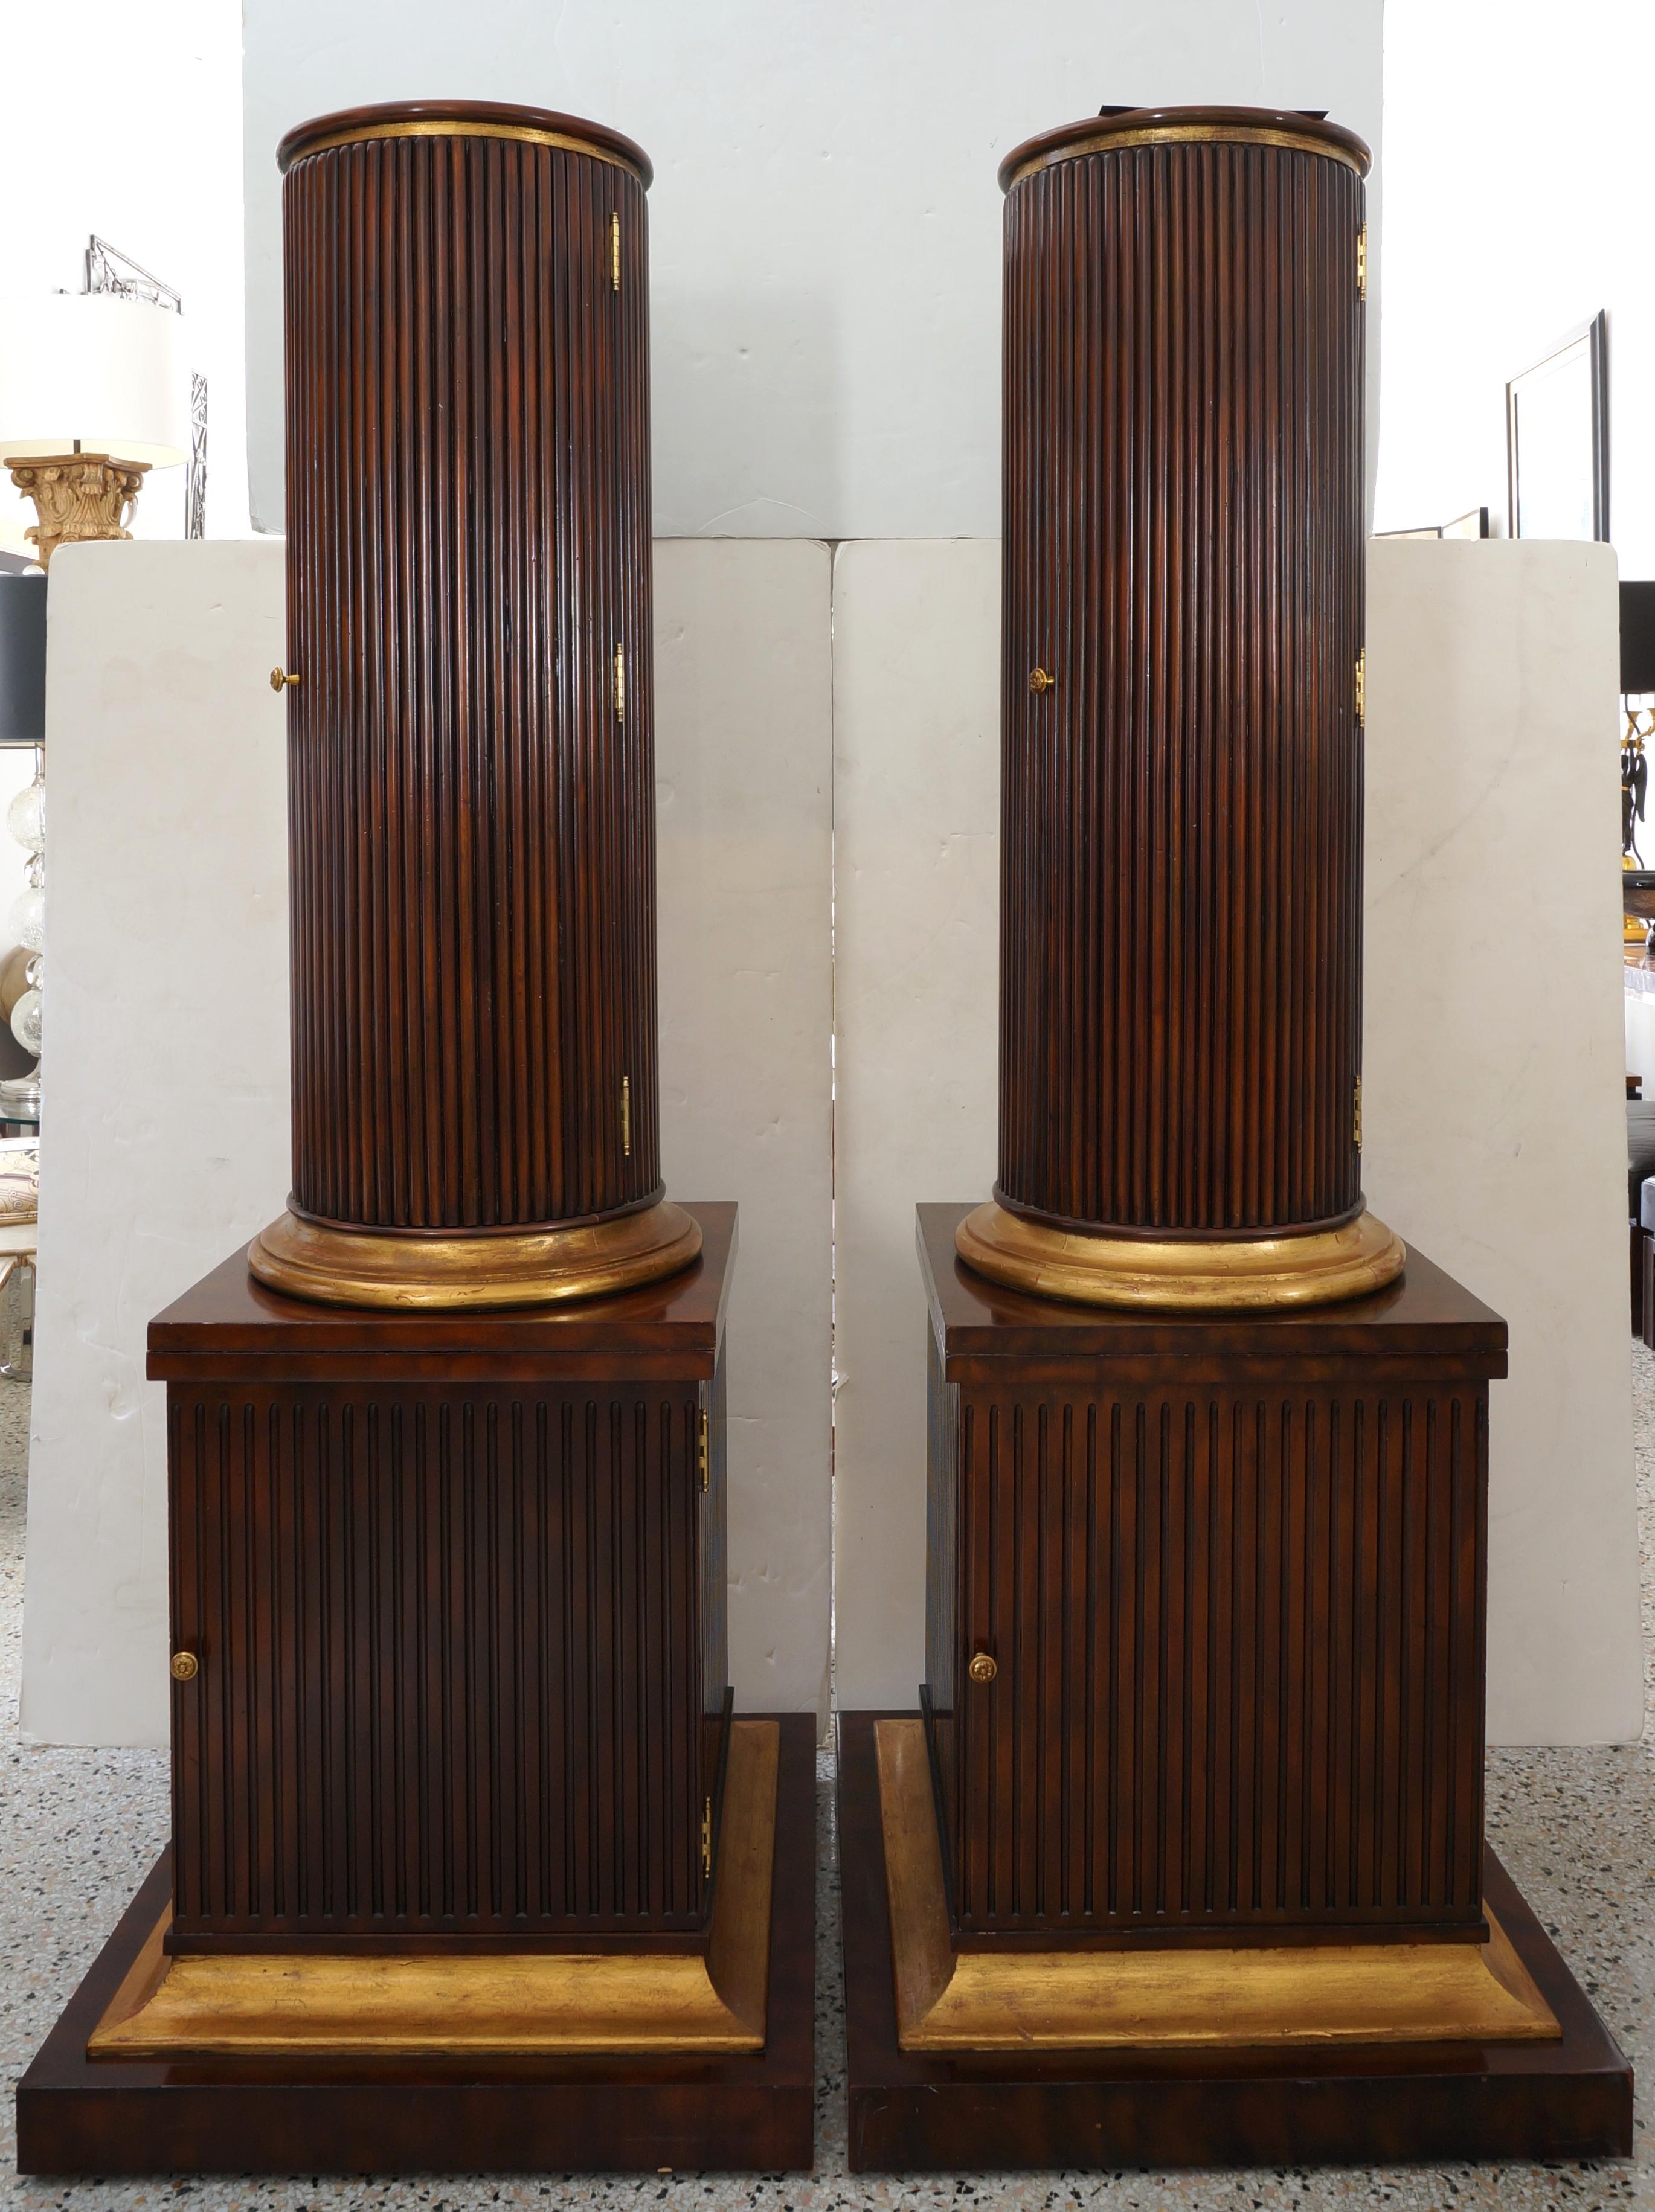 This stylish and chic pair of baltic Regency style cabinets date to the 1980s and will make a definite statement with their scale, form and finishes.

Note: Diameter of the top of the column is 14.75